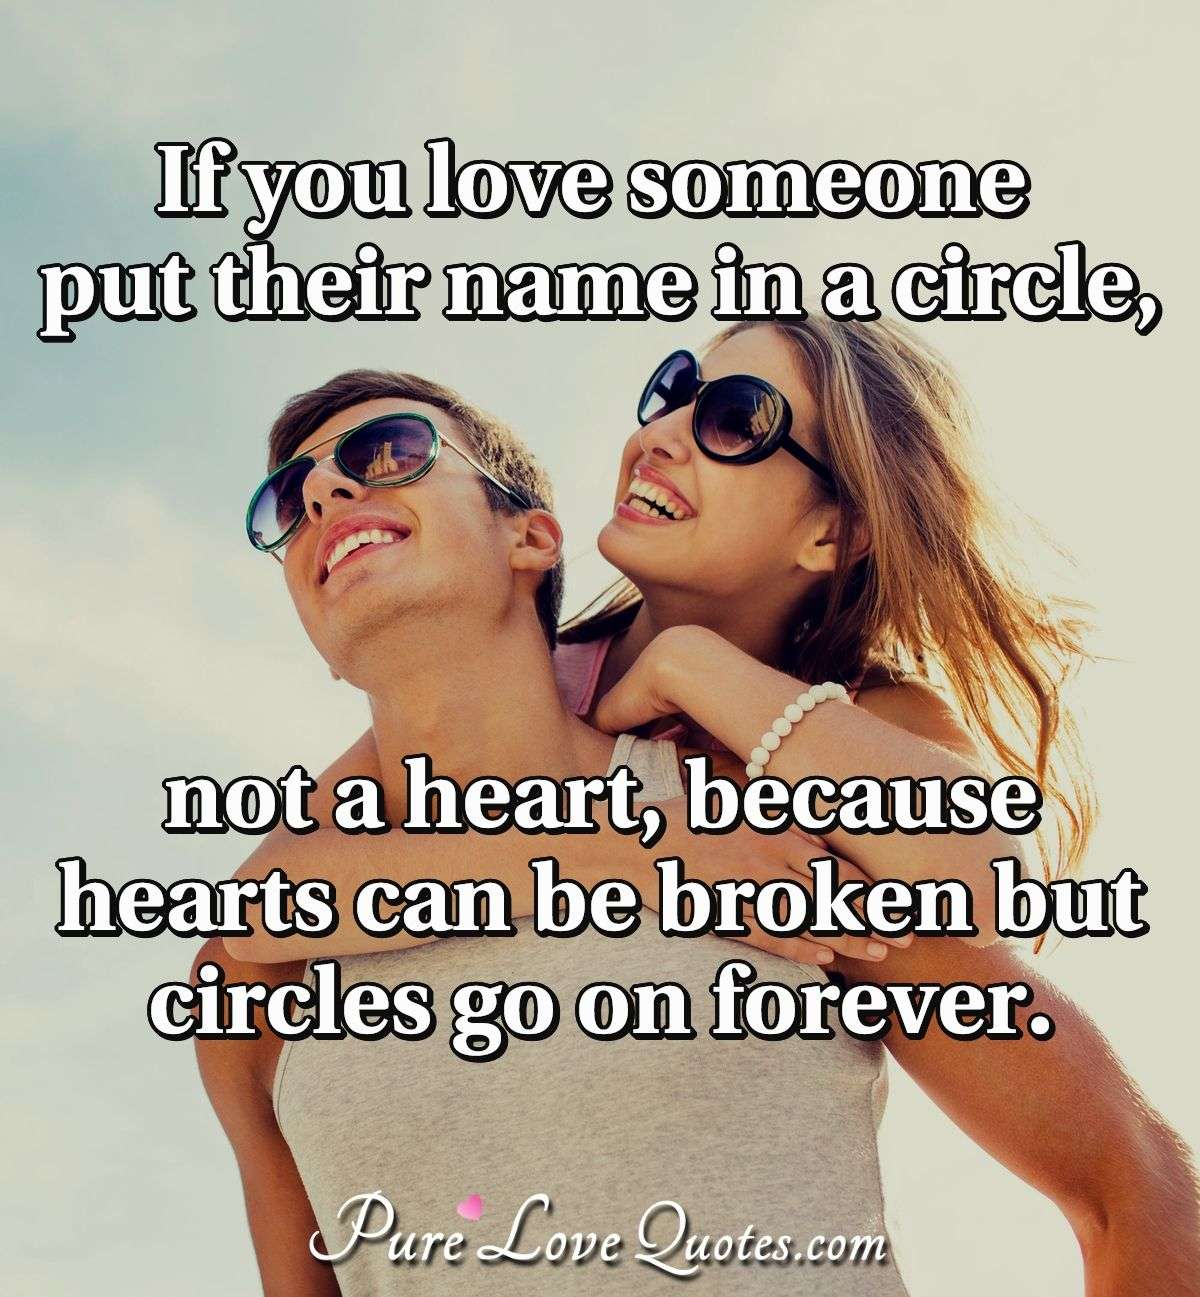 If you love someone put their name in a circle, not a heart, because hearts can be broken but circles go on forever. - Anonymous